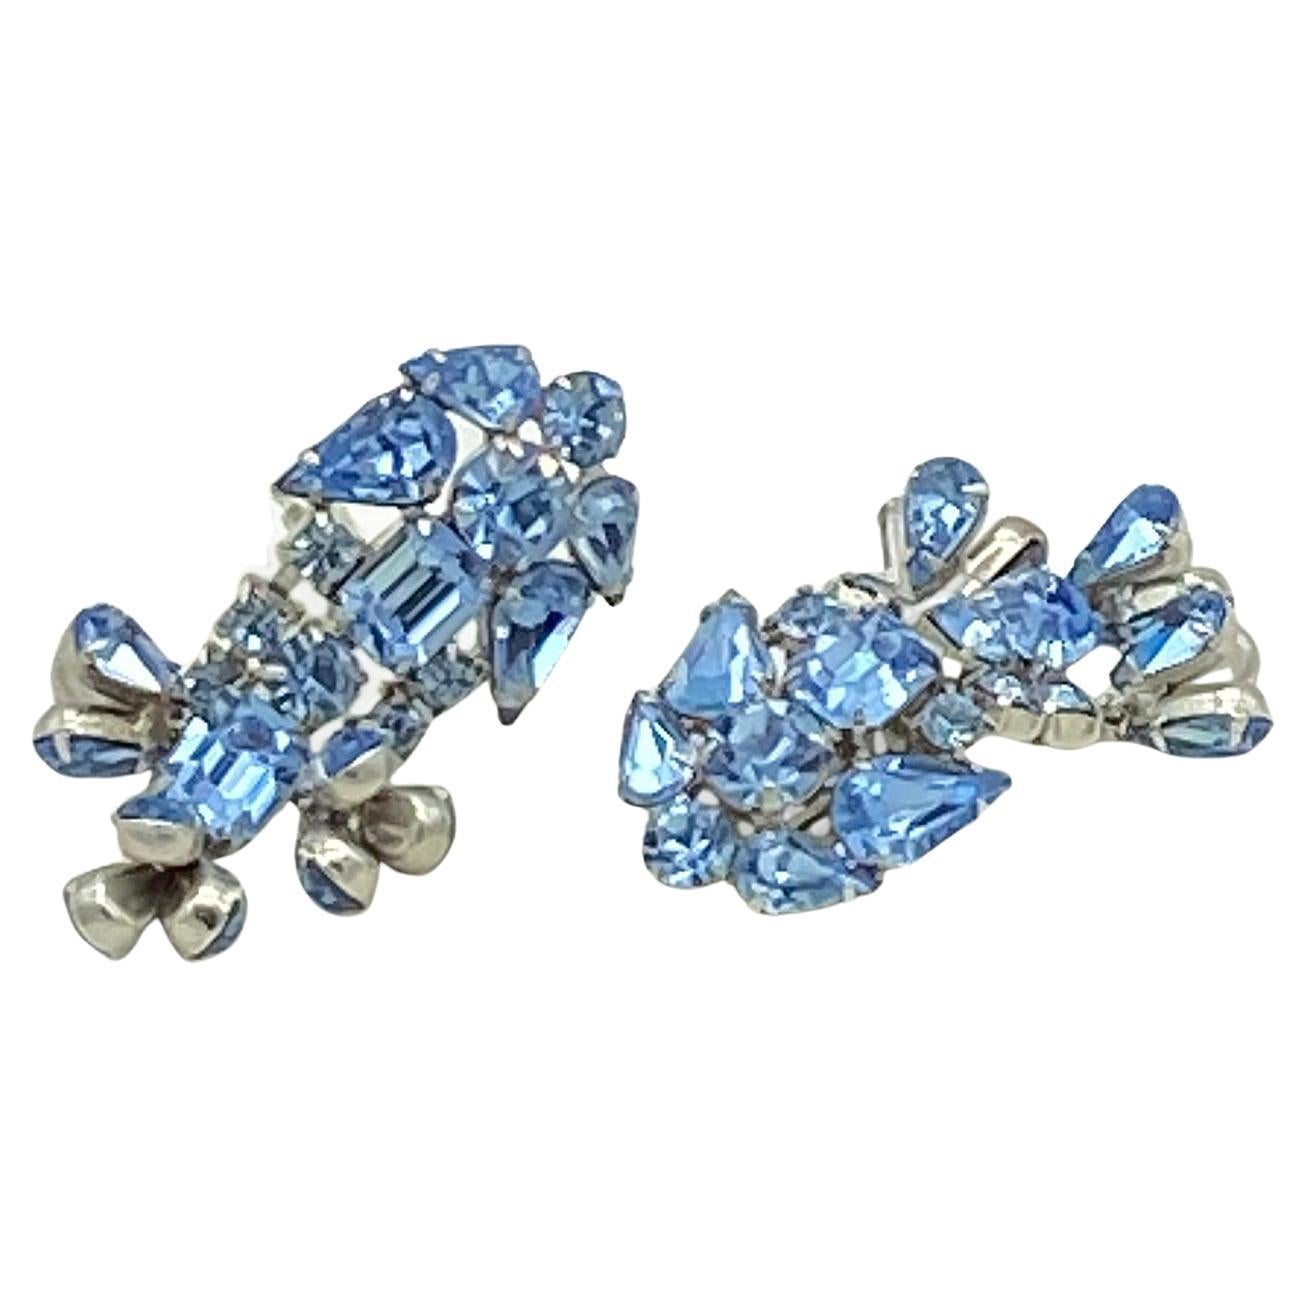 This is a pair of  Hollywood Regency Style rhinestone dangle earrings  prong set with multiple different shaped French blue rhinestones on rhodium plated metal. These clip back earrings have an unusual triple 3 teardrop cluster dangling design.